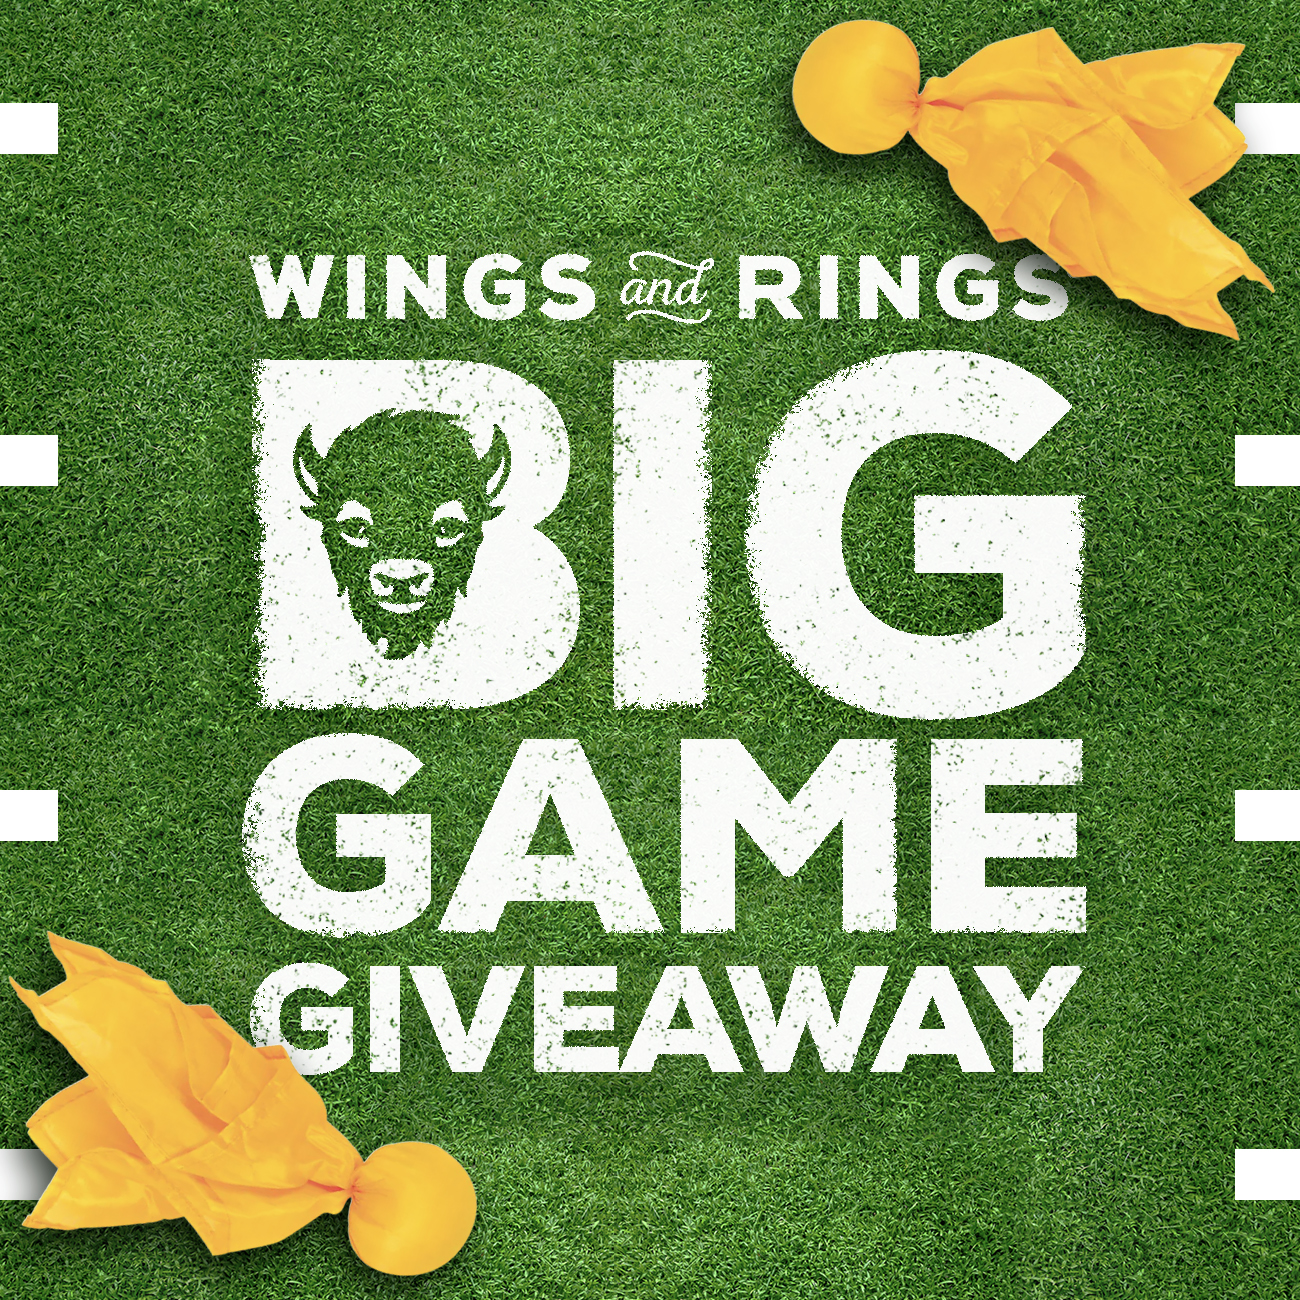 Wings and Rings Big Game Wing Giveaway!